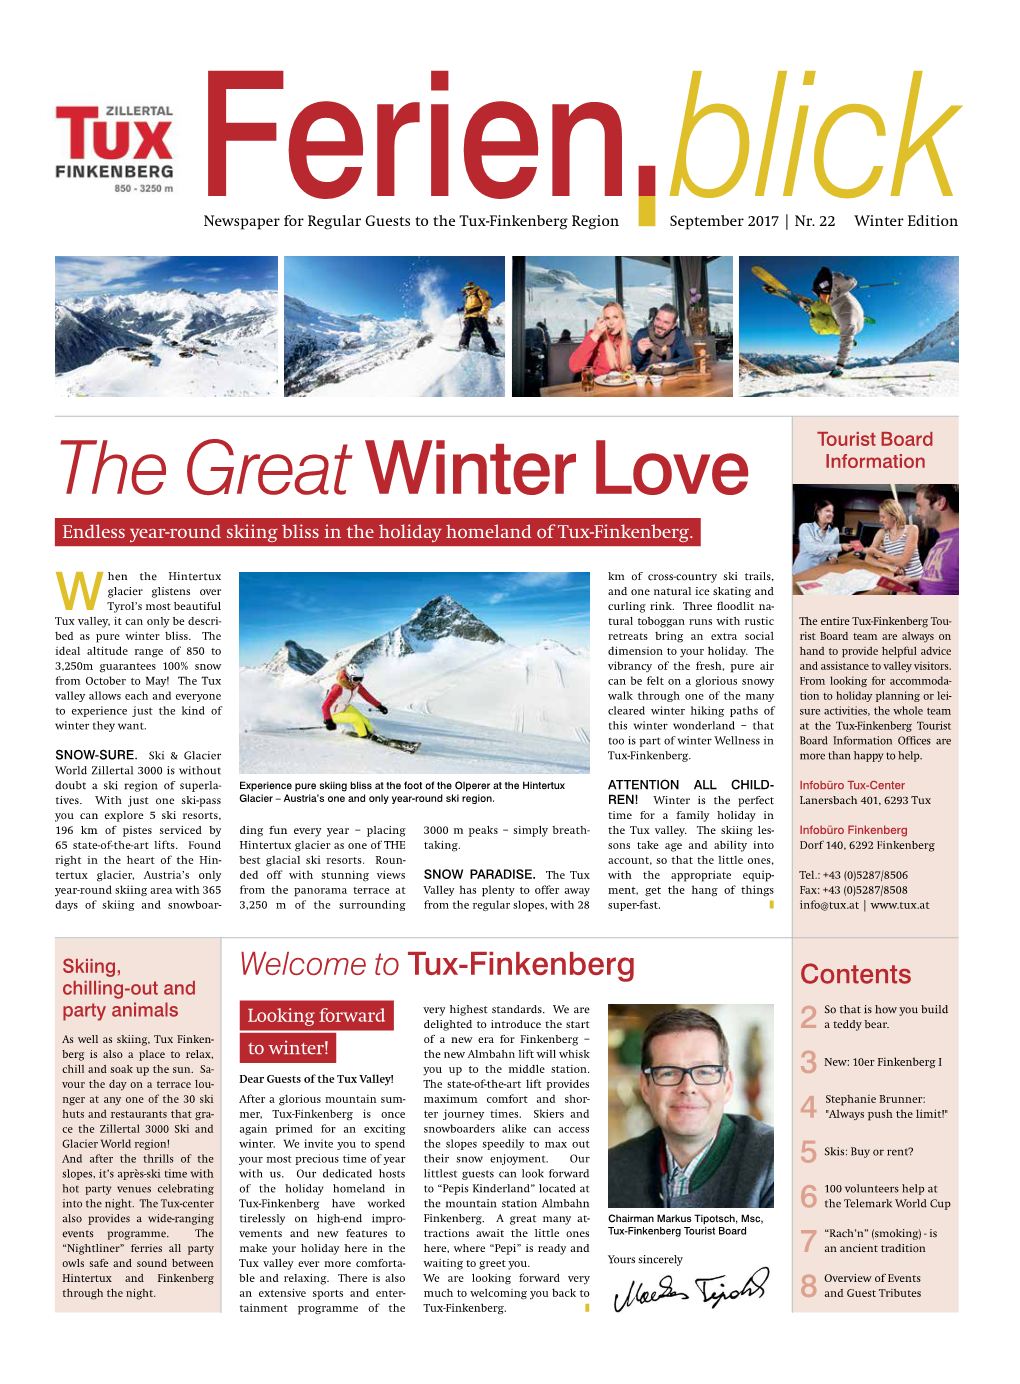 The Great Winter Love Information Endless Year-Round Skiing Bliss in the Holiday Homeland of Tux-Finkenberg